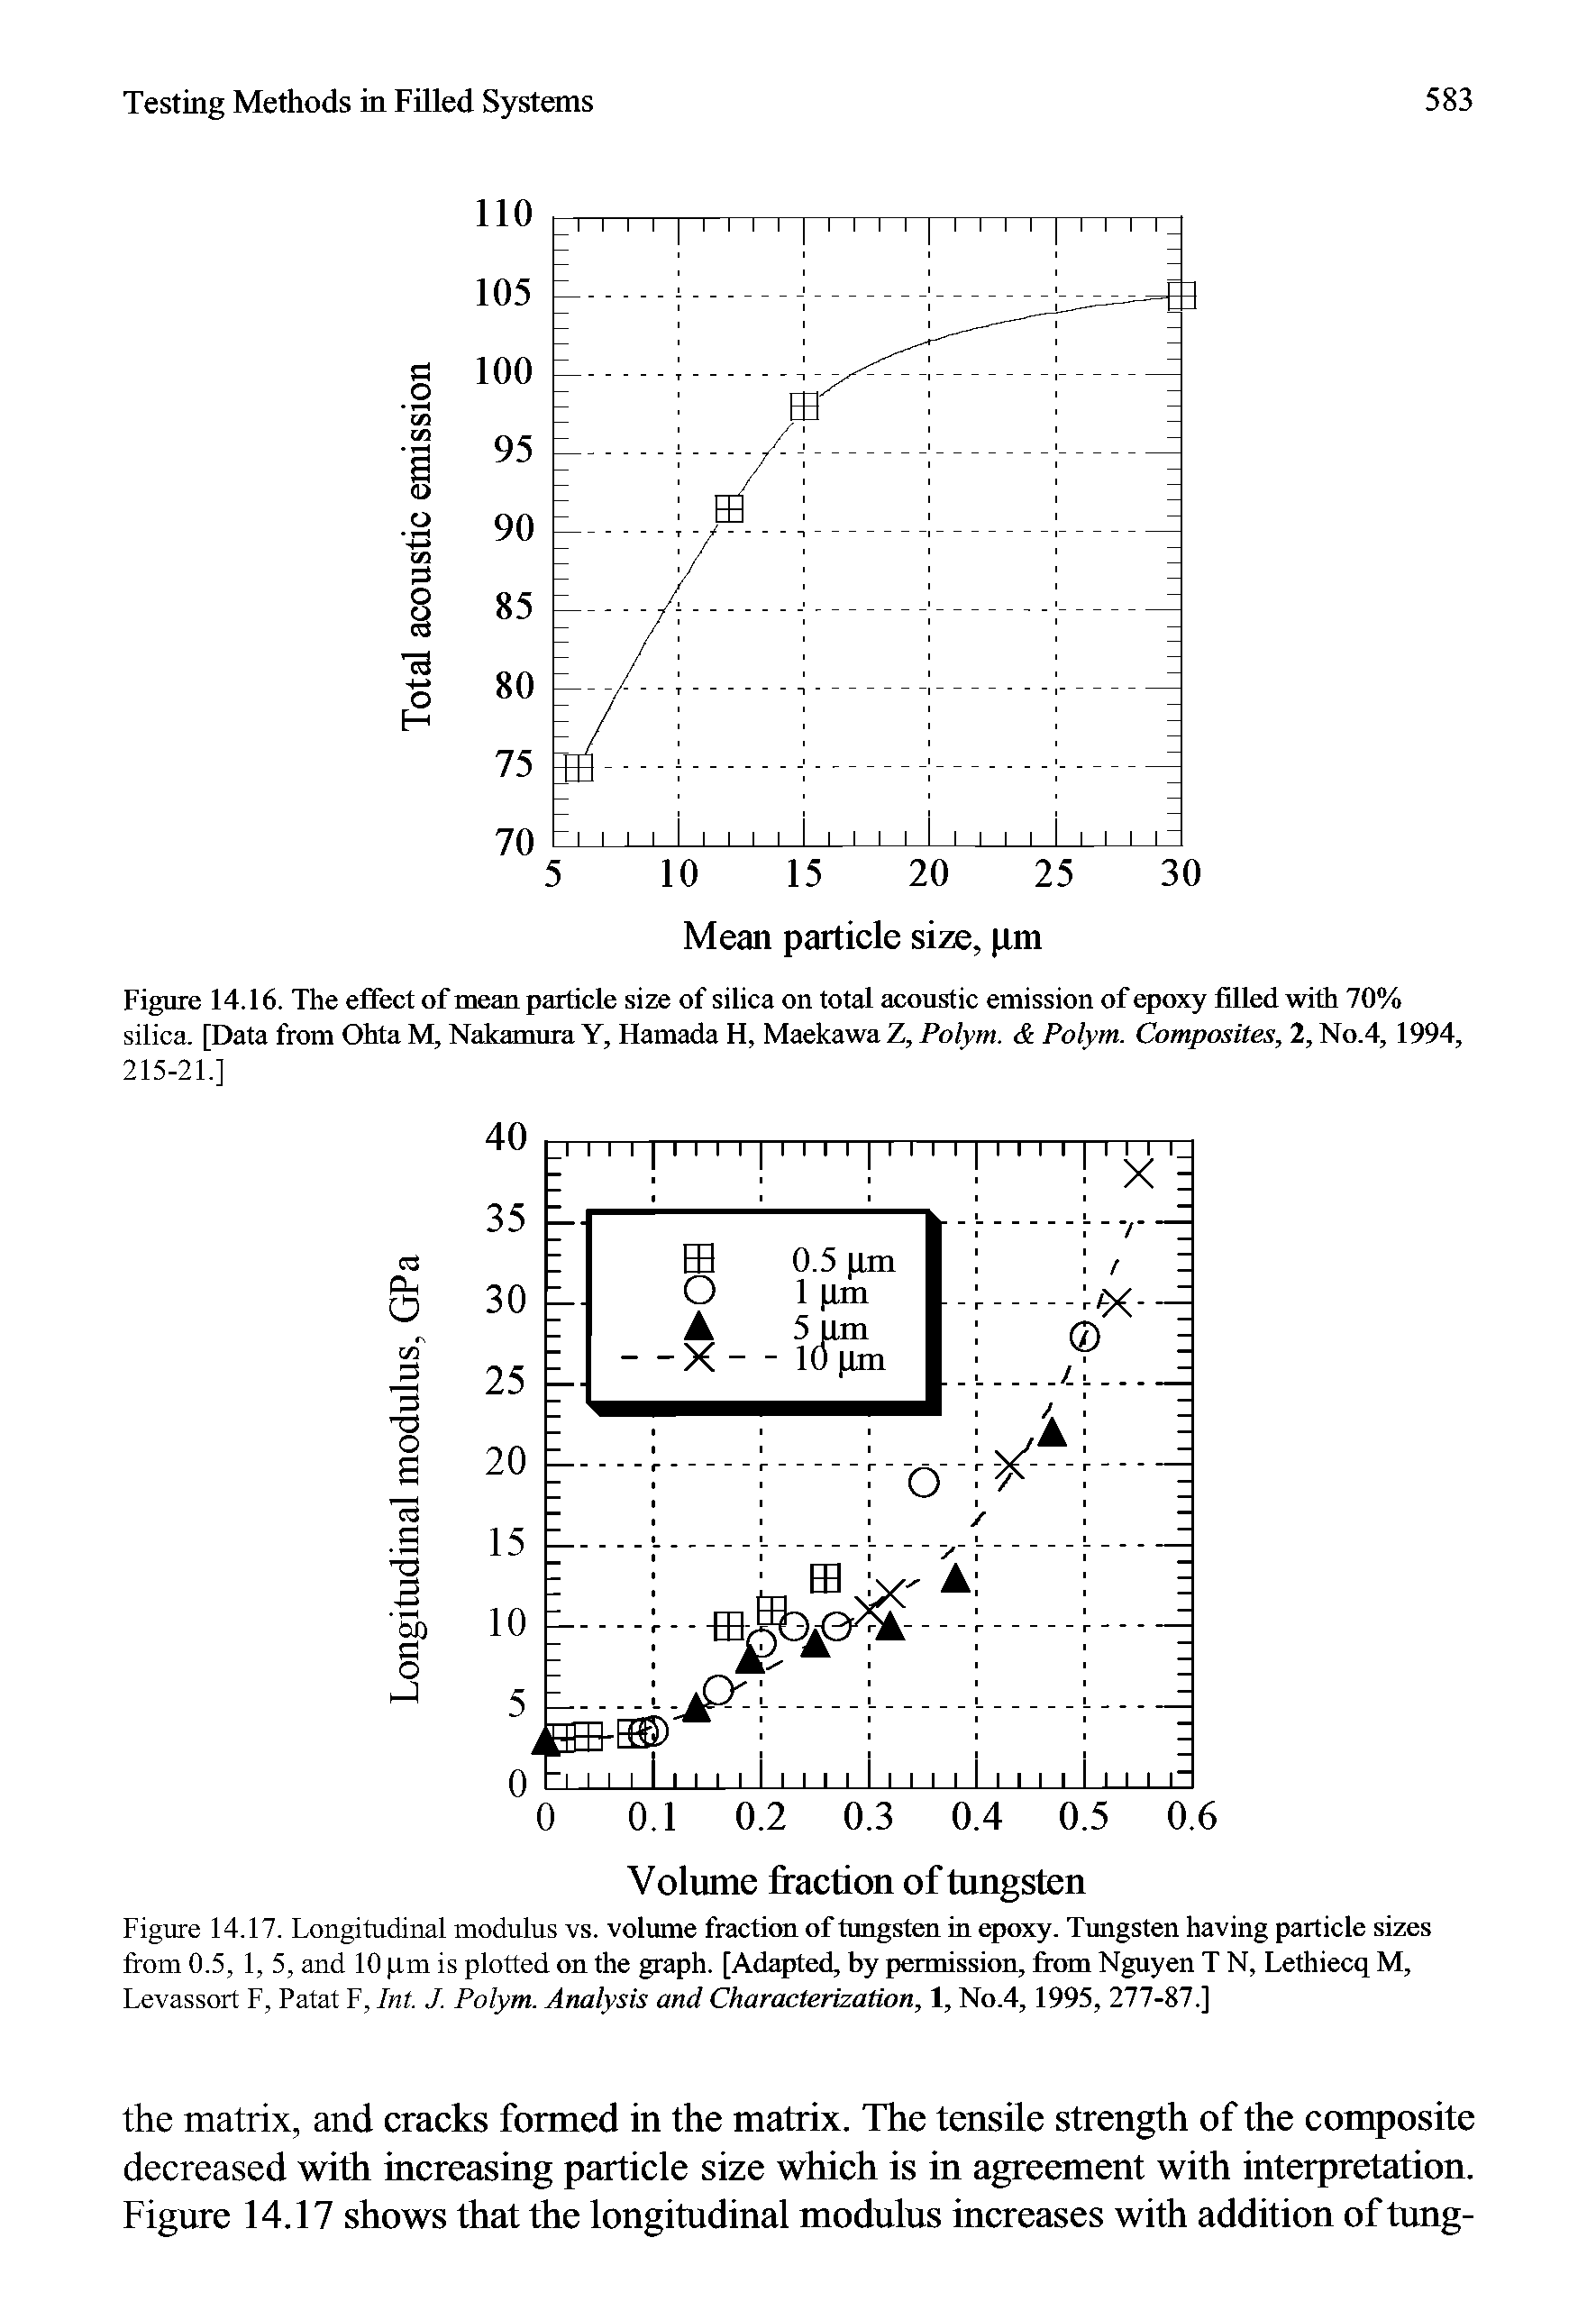 Figure 14.16. The effect of mean particle size of silica on total acoustic emission of epoxy filled with 70% silica. [Data from Ohta M, Nakamura Y, Hamada H, Maekawa Z, Polym. Polym. Composites, 2, No.4, 1994, 215-21.]...